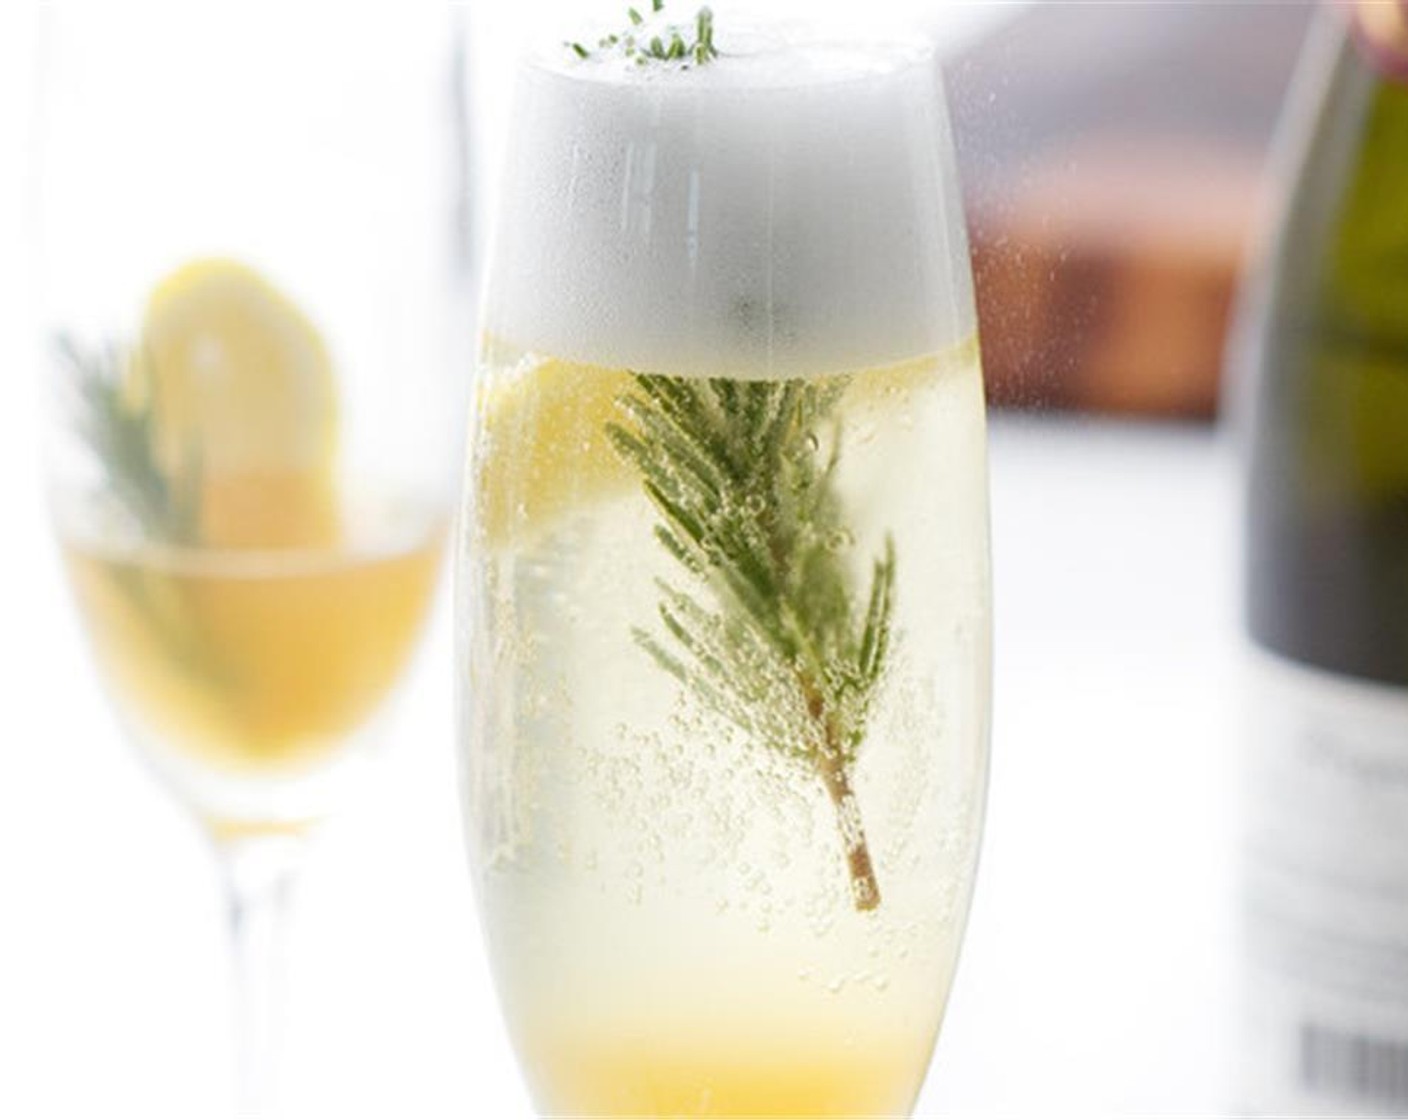 step 2 Pour strained liquid into 2 champagne glasses. Top each with Champagne (to taste), and serve with a Fresh Rosemary (1 sprig) as a garnish.